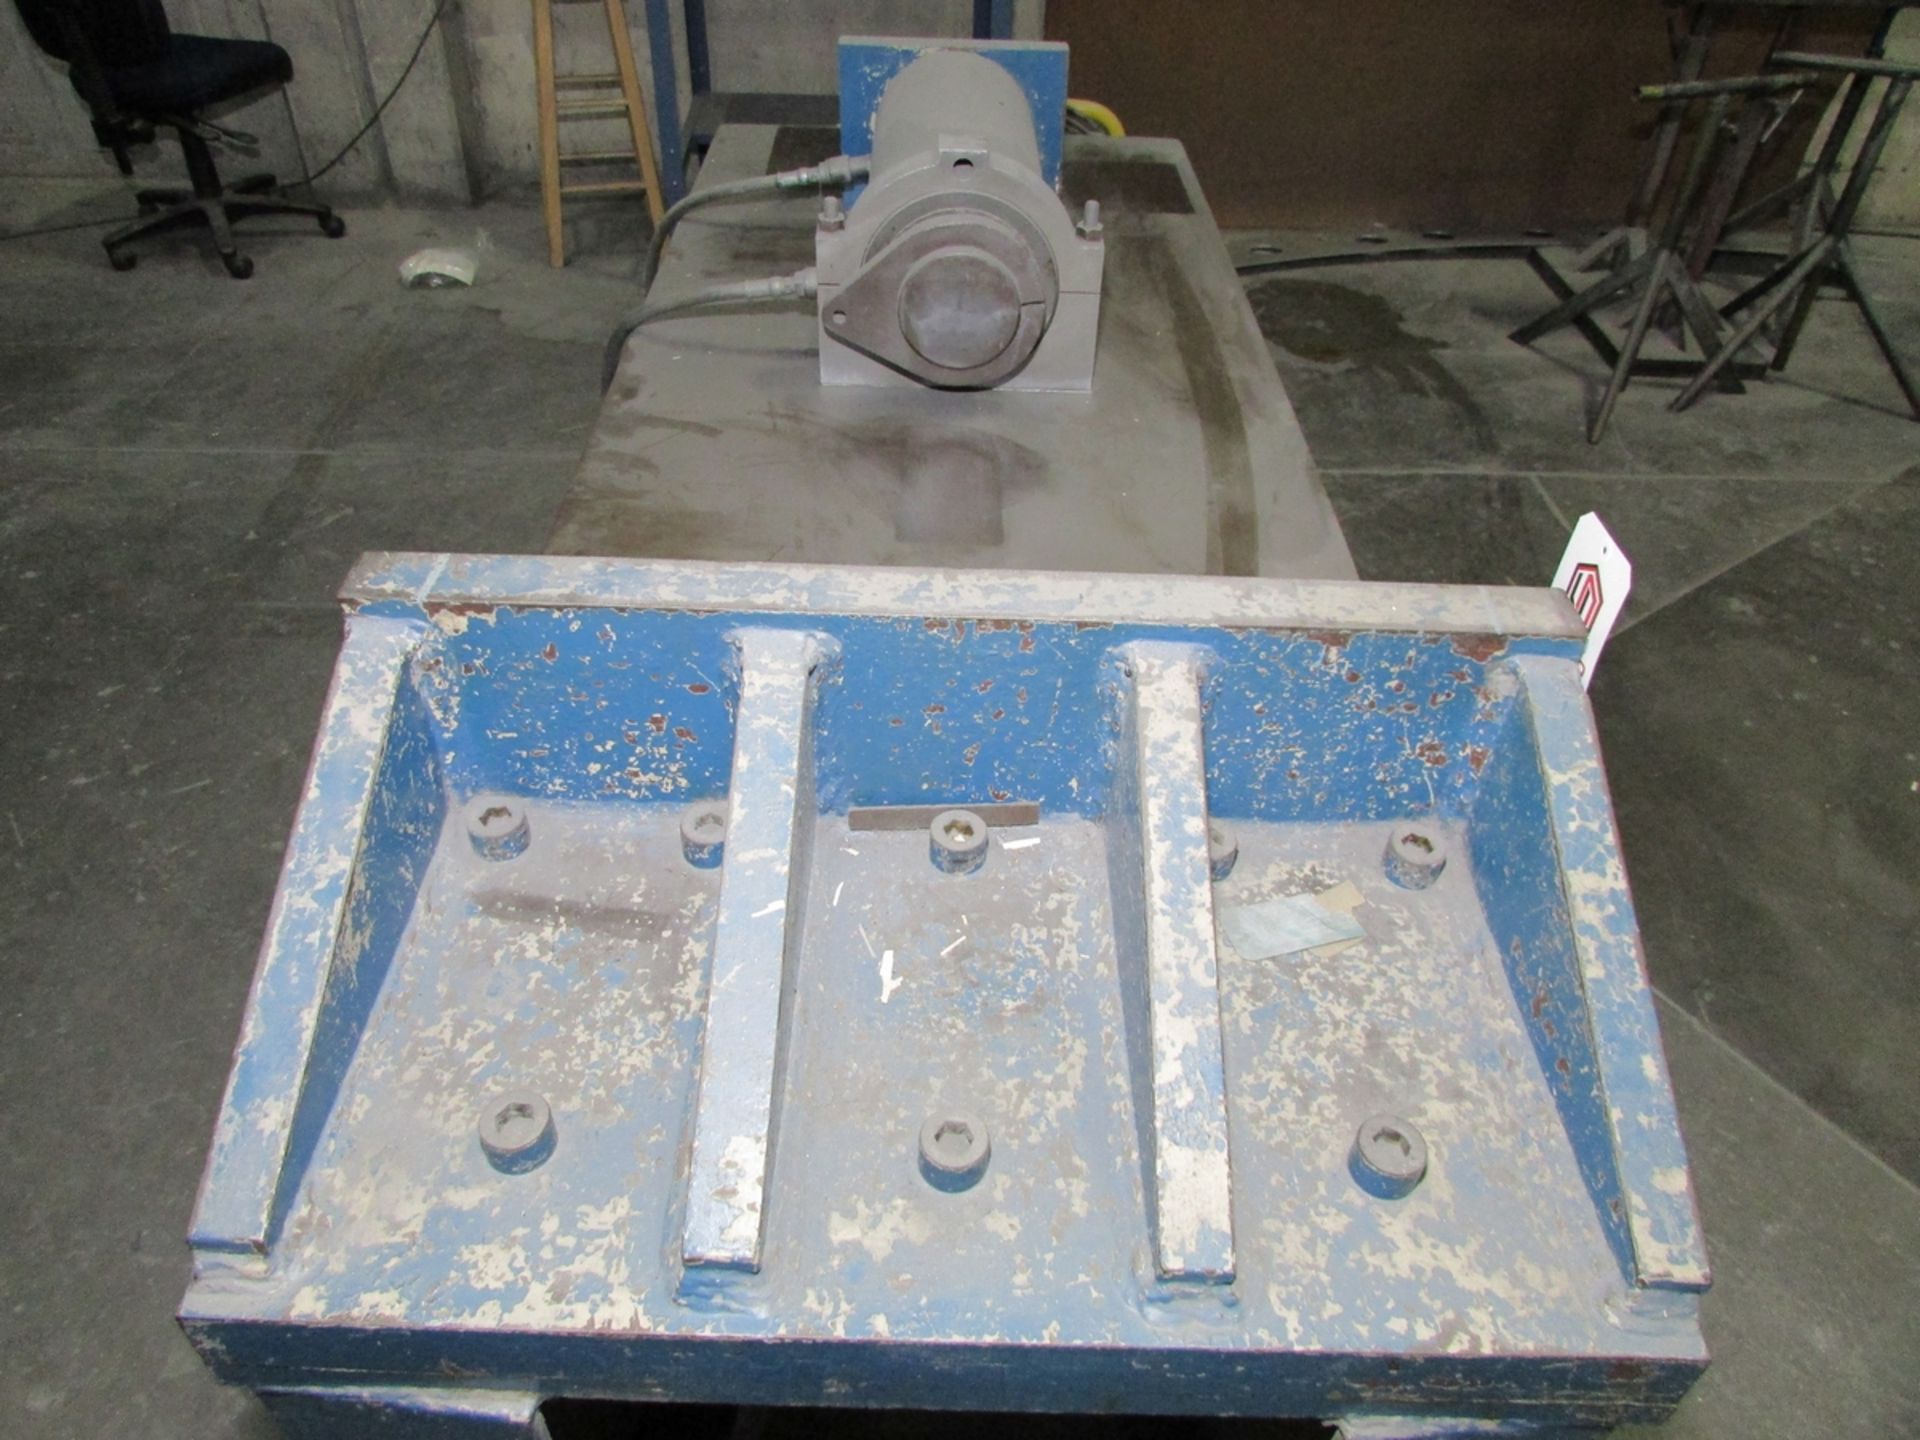 HORIZONTAL HYDRAULIC STRAIGHTENING PRESS, 30" X 9" ANGLE PLATE, 80" X 30" TABLE, ENERPAC GPER5320J - Image 12 of 12